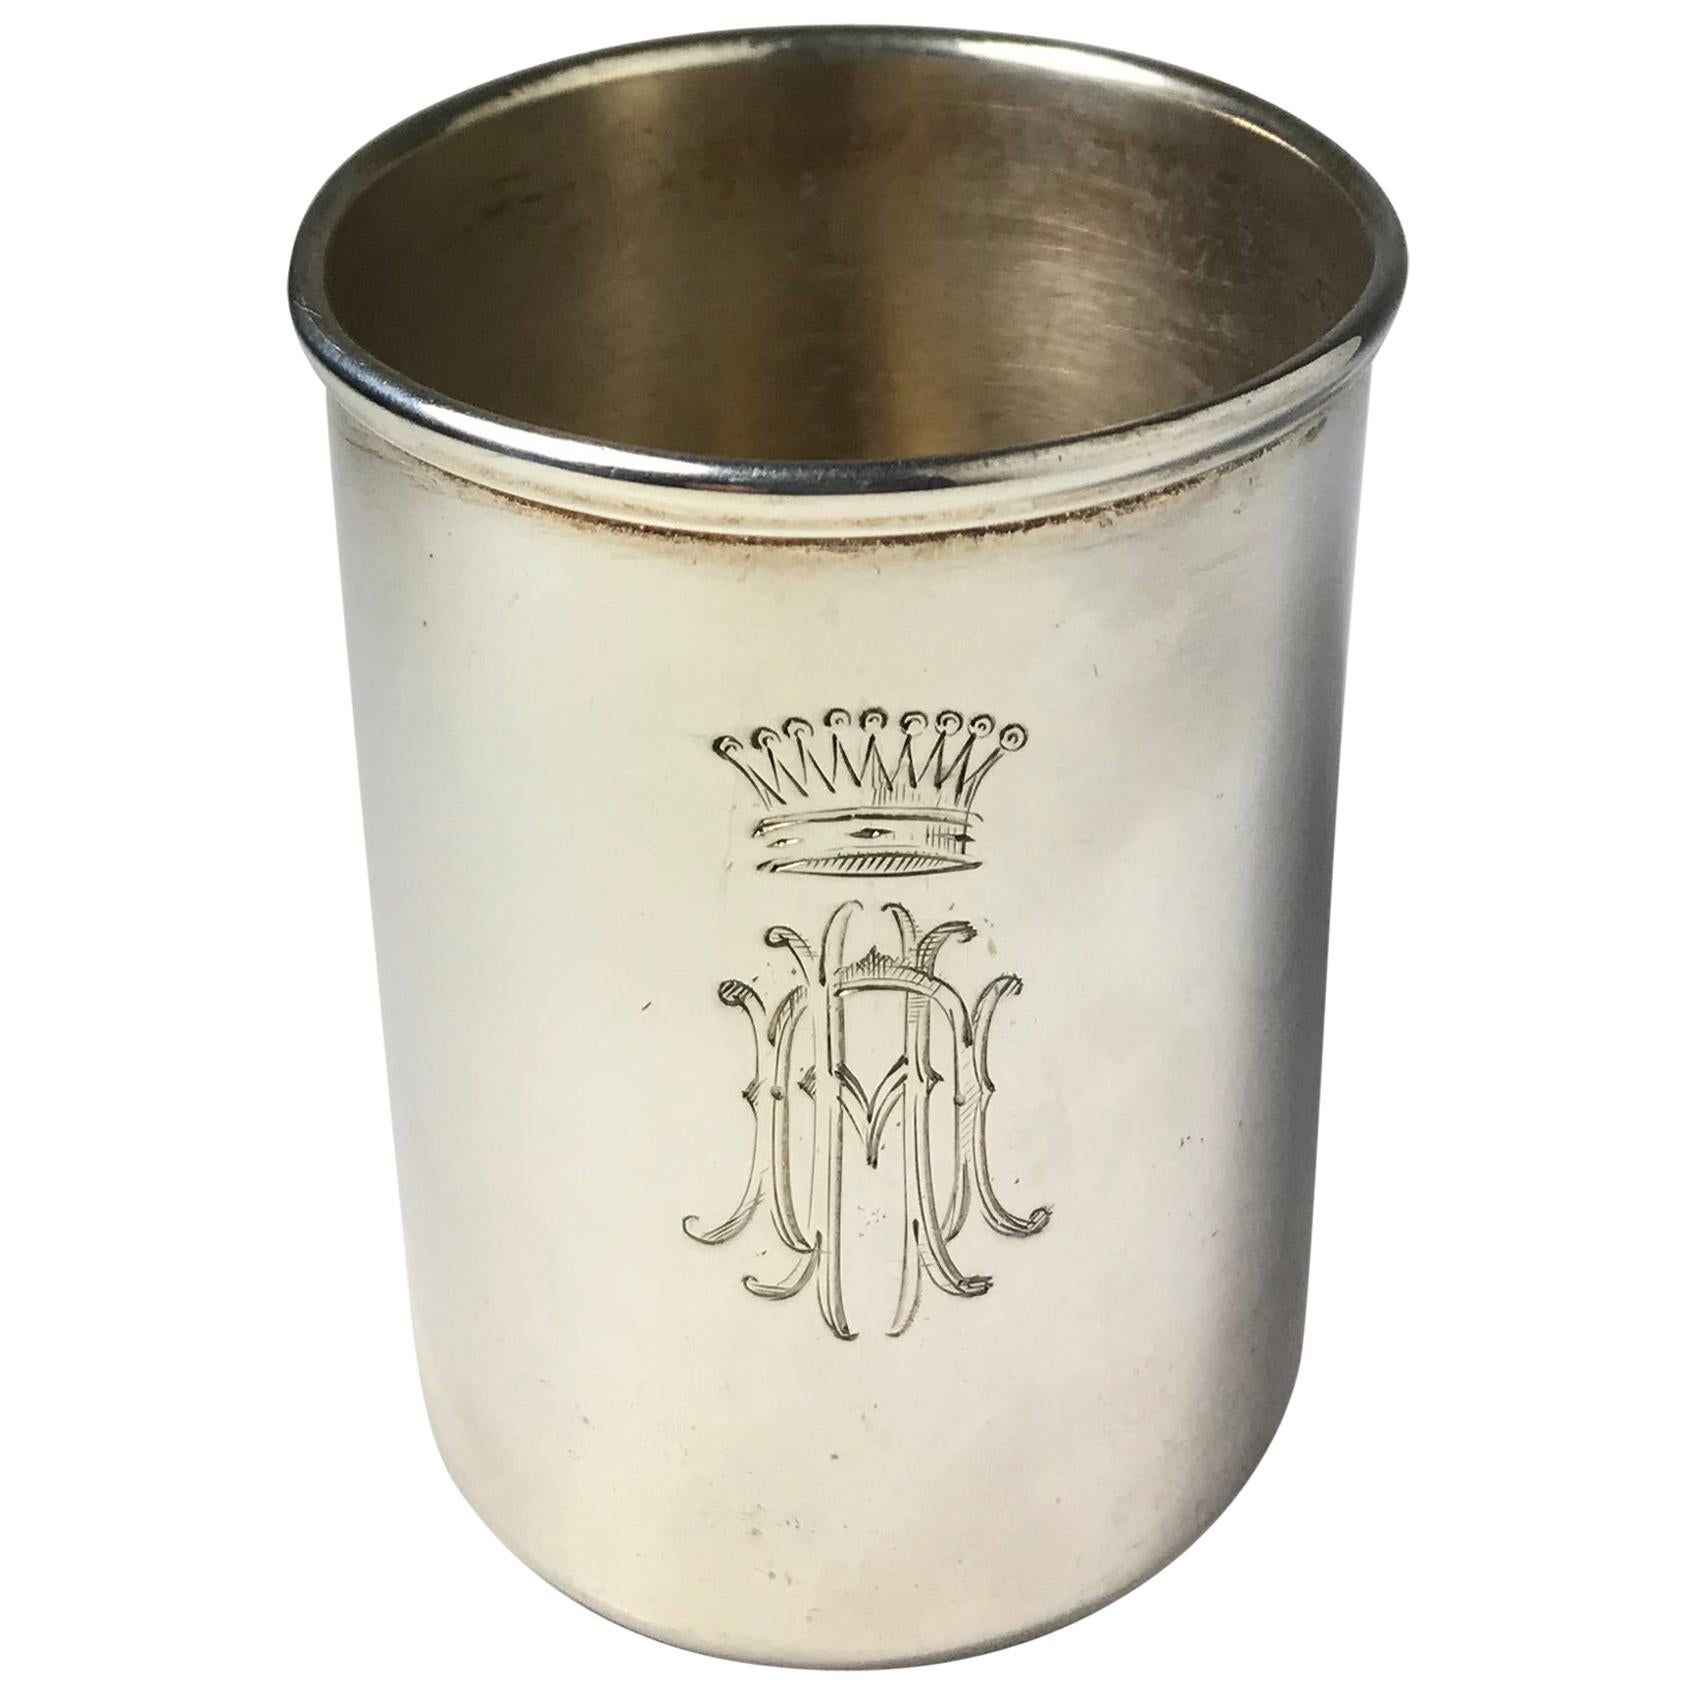 Large Russian Imperial-era Silver Vodka Cup by Morozov, St. Petersburg, c. 1900